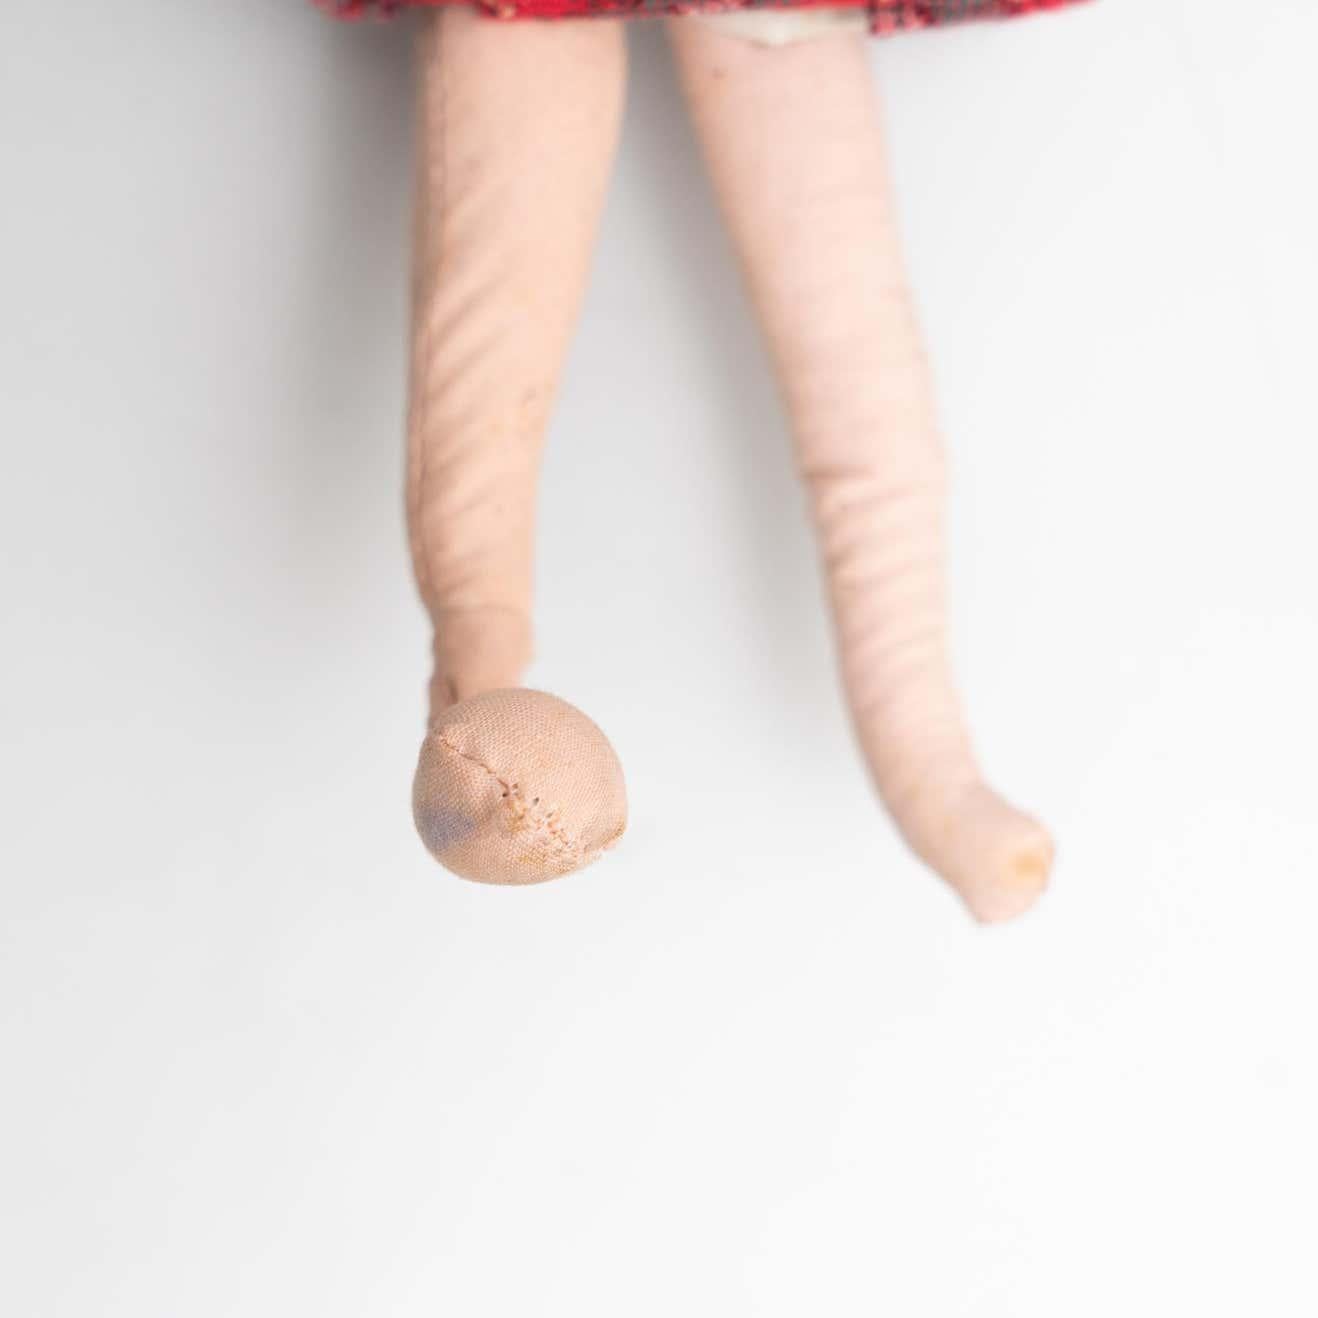 Set of Two Antique Traditional Spanish Rag Doll, circa 1920 For Sale 6